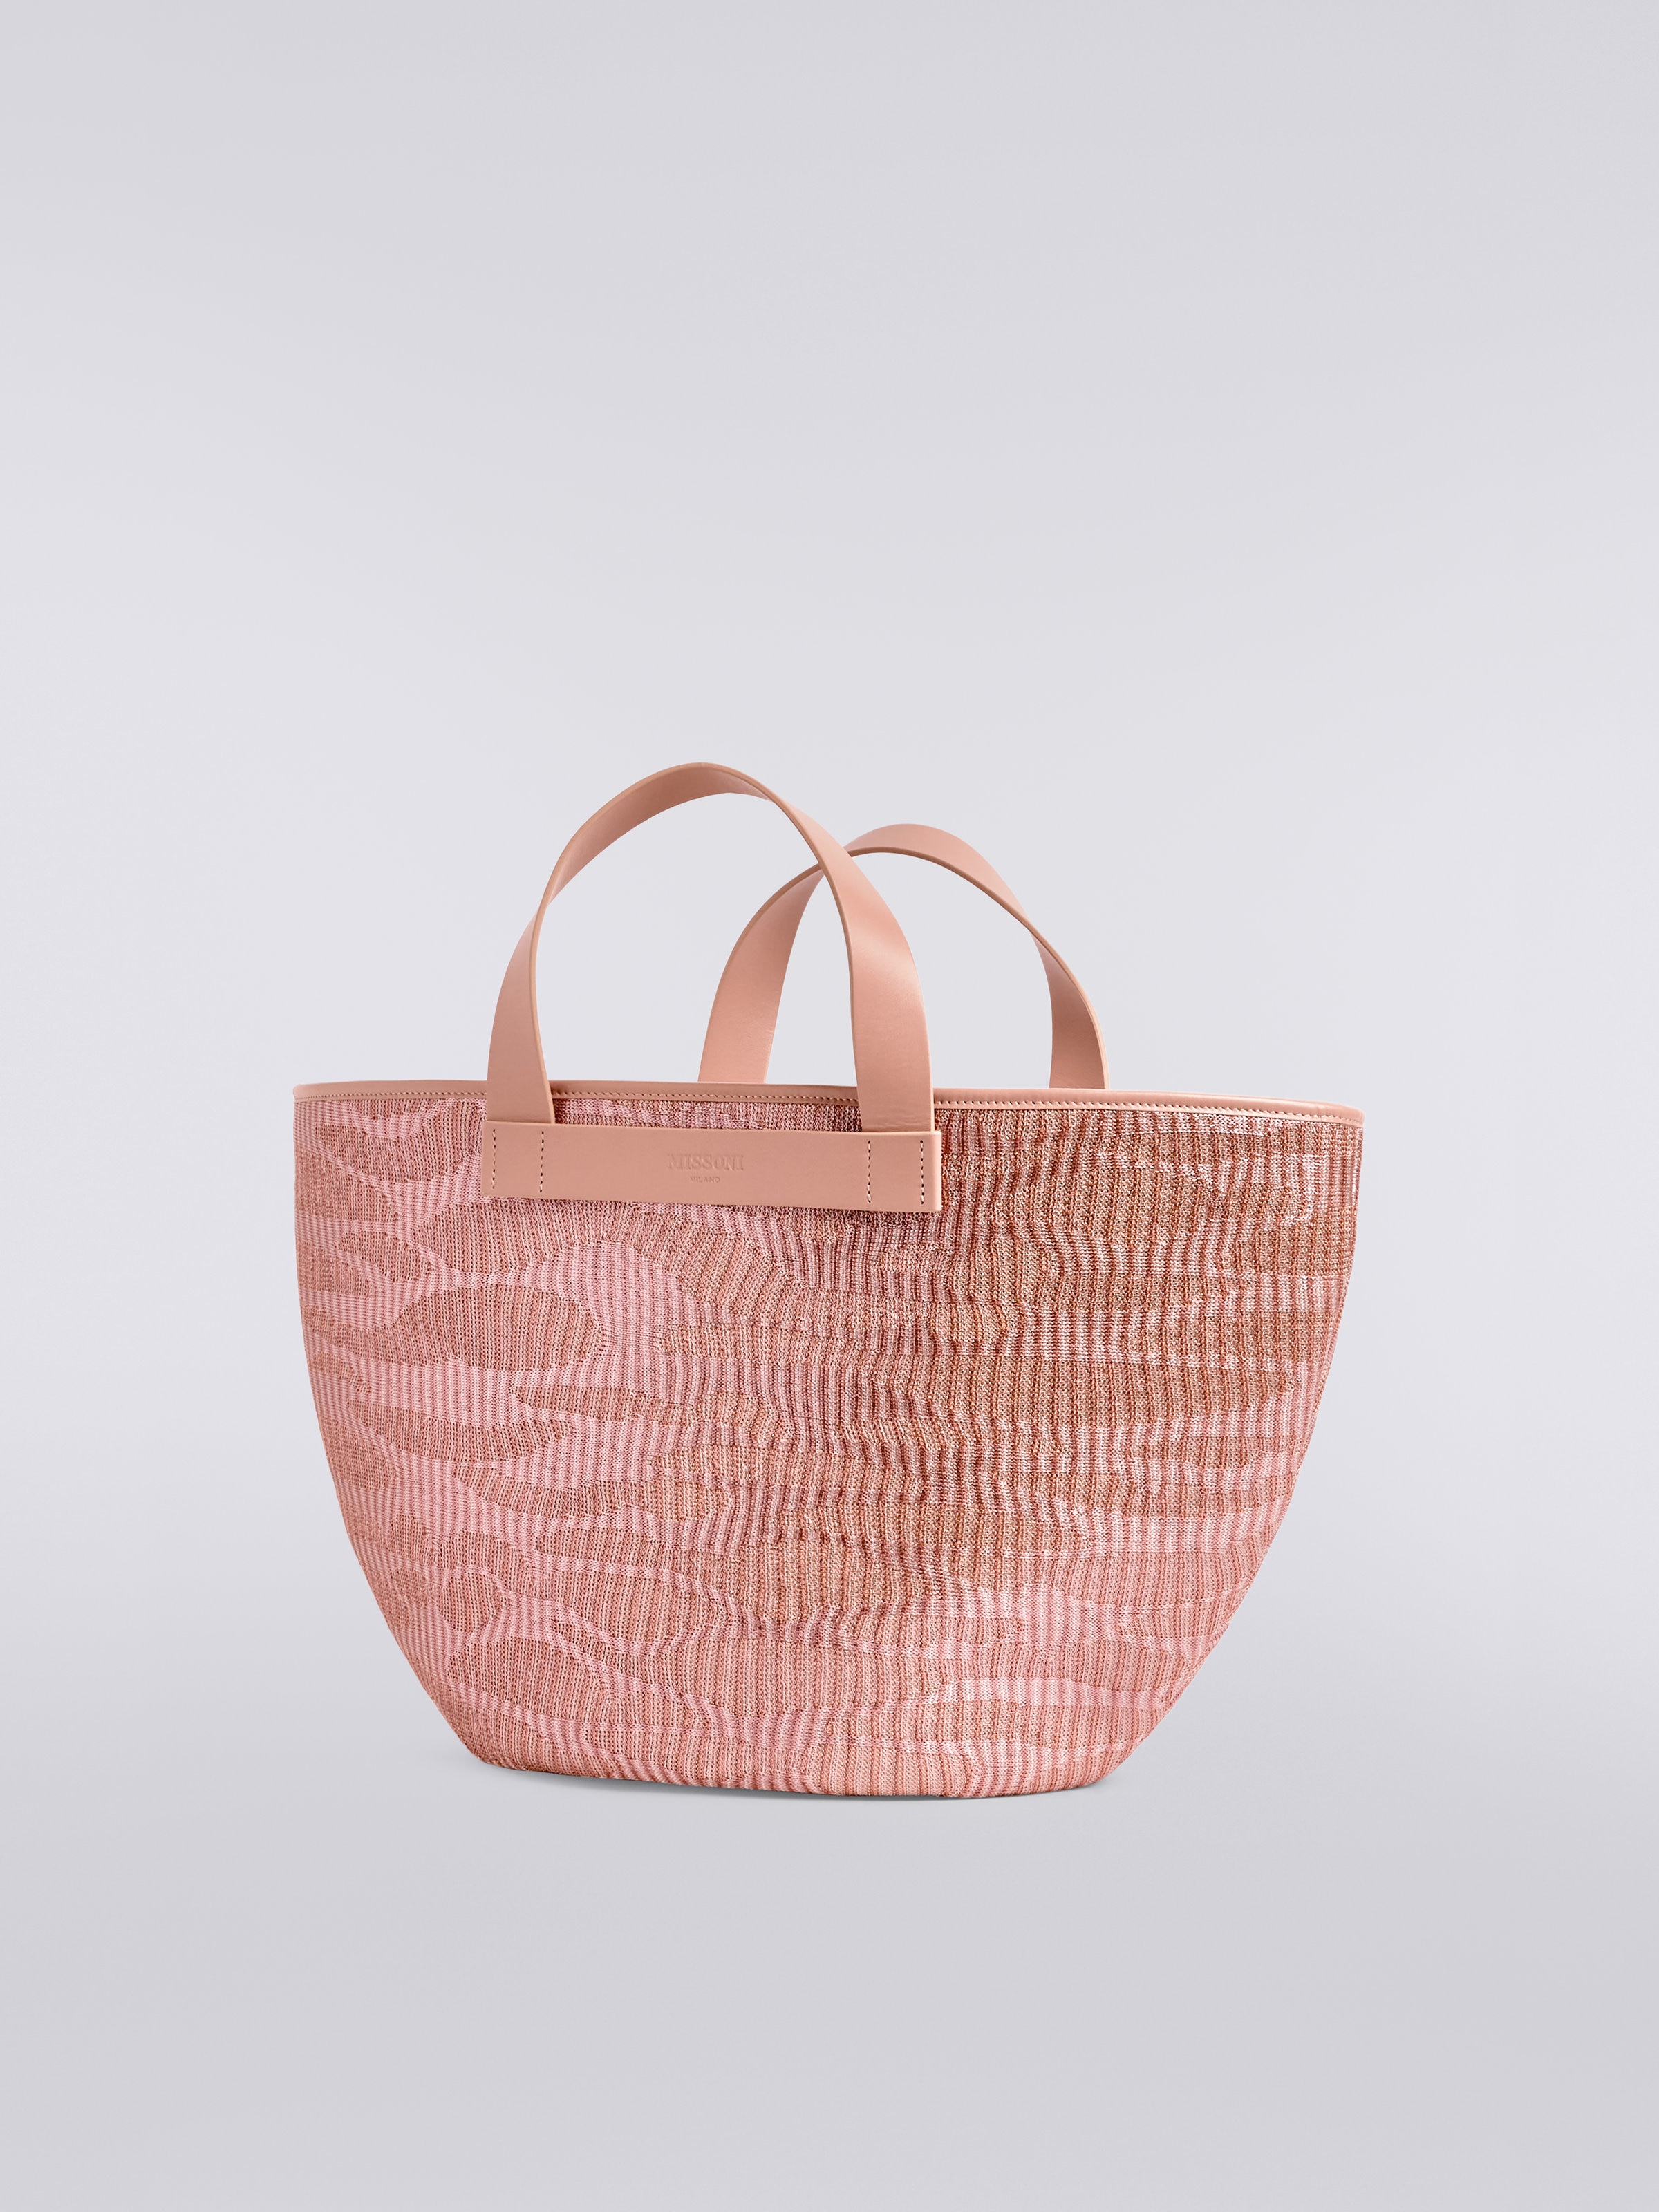 Jacquard viscose knit tote with leather handles, Pink - 1